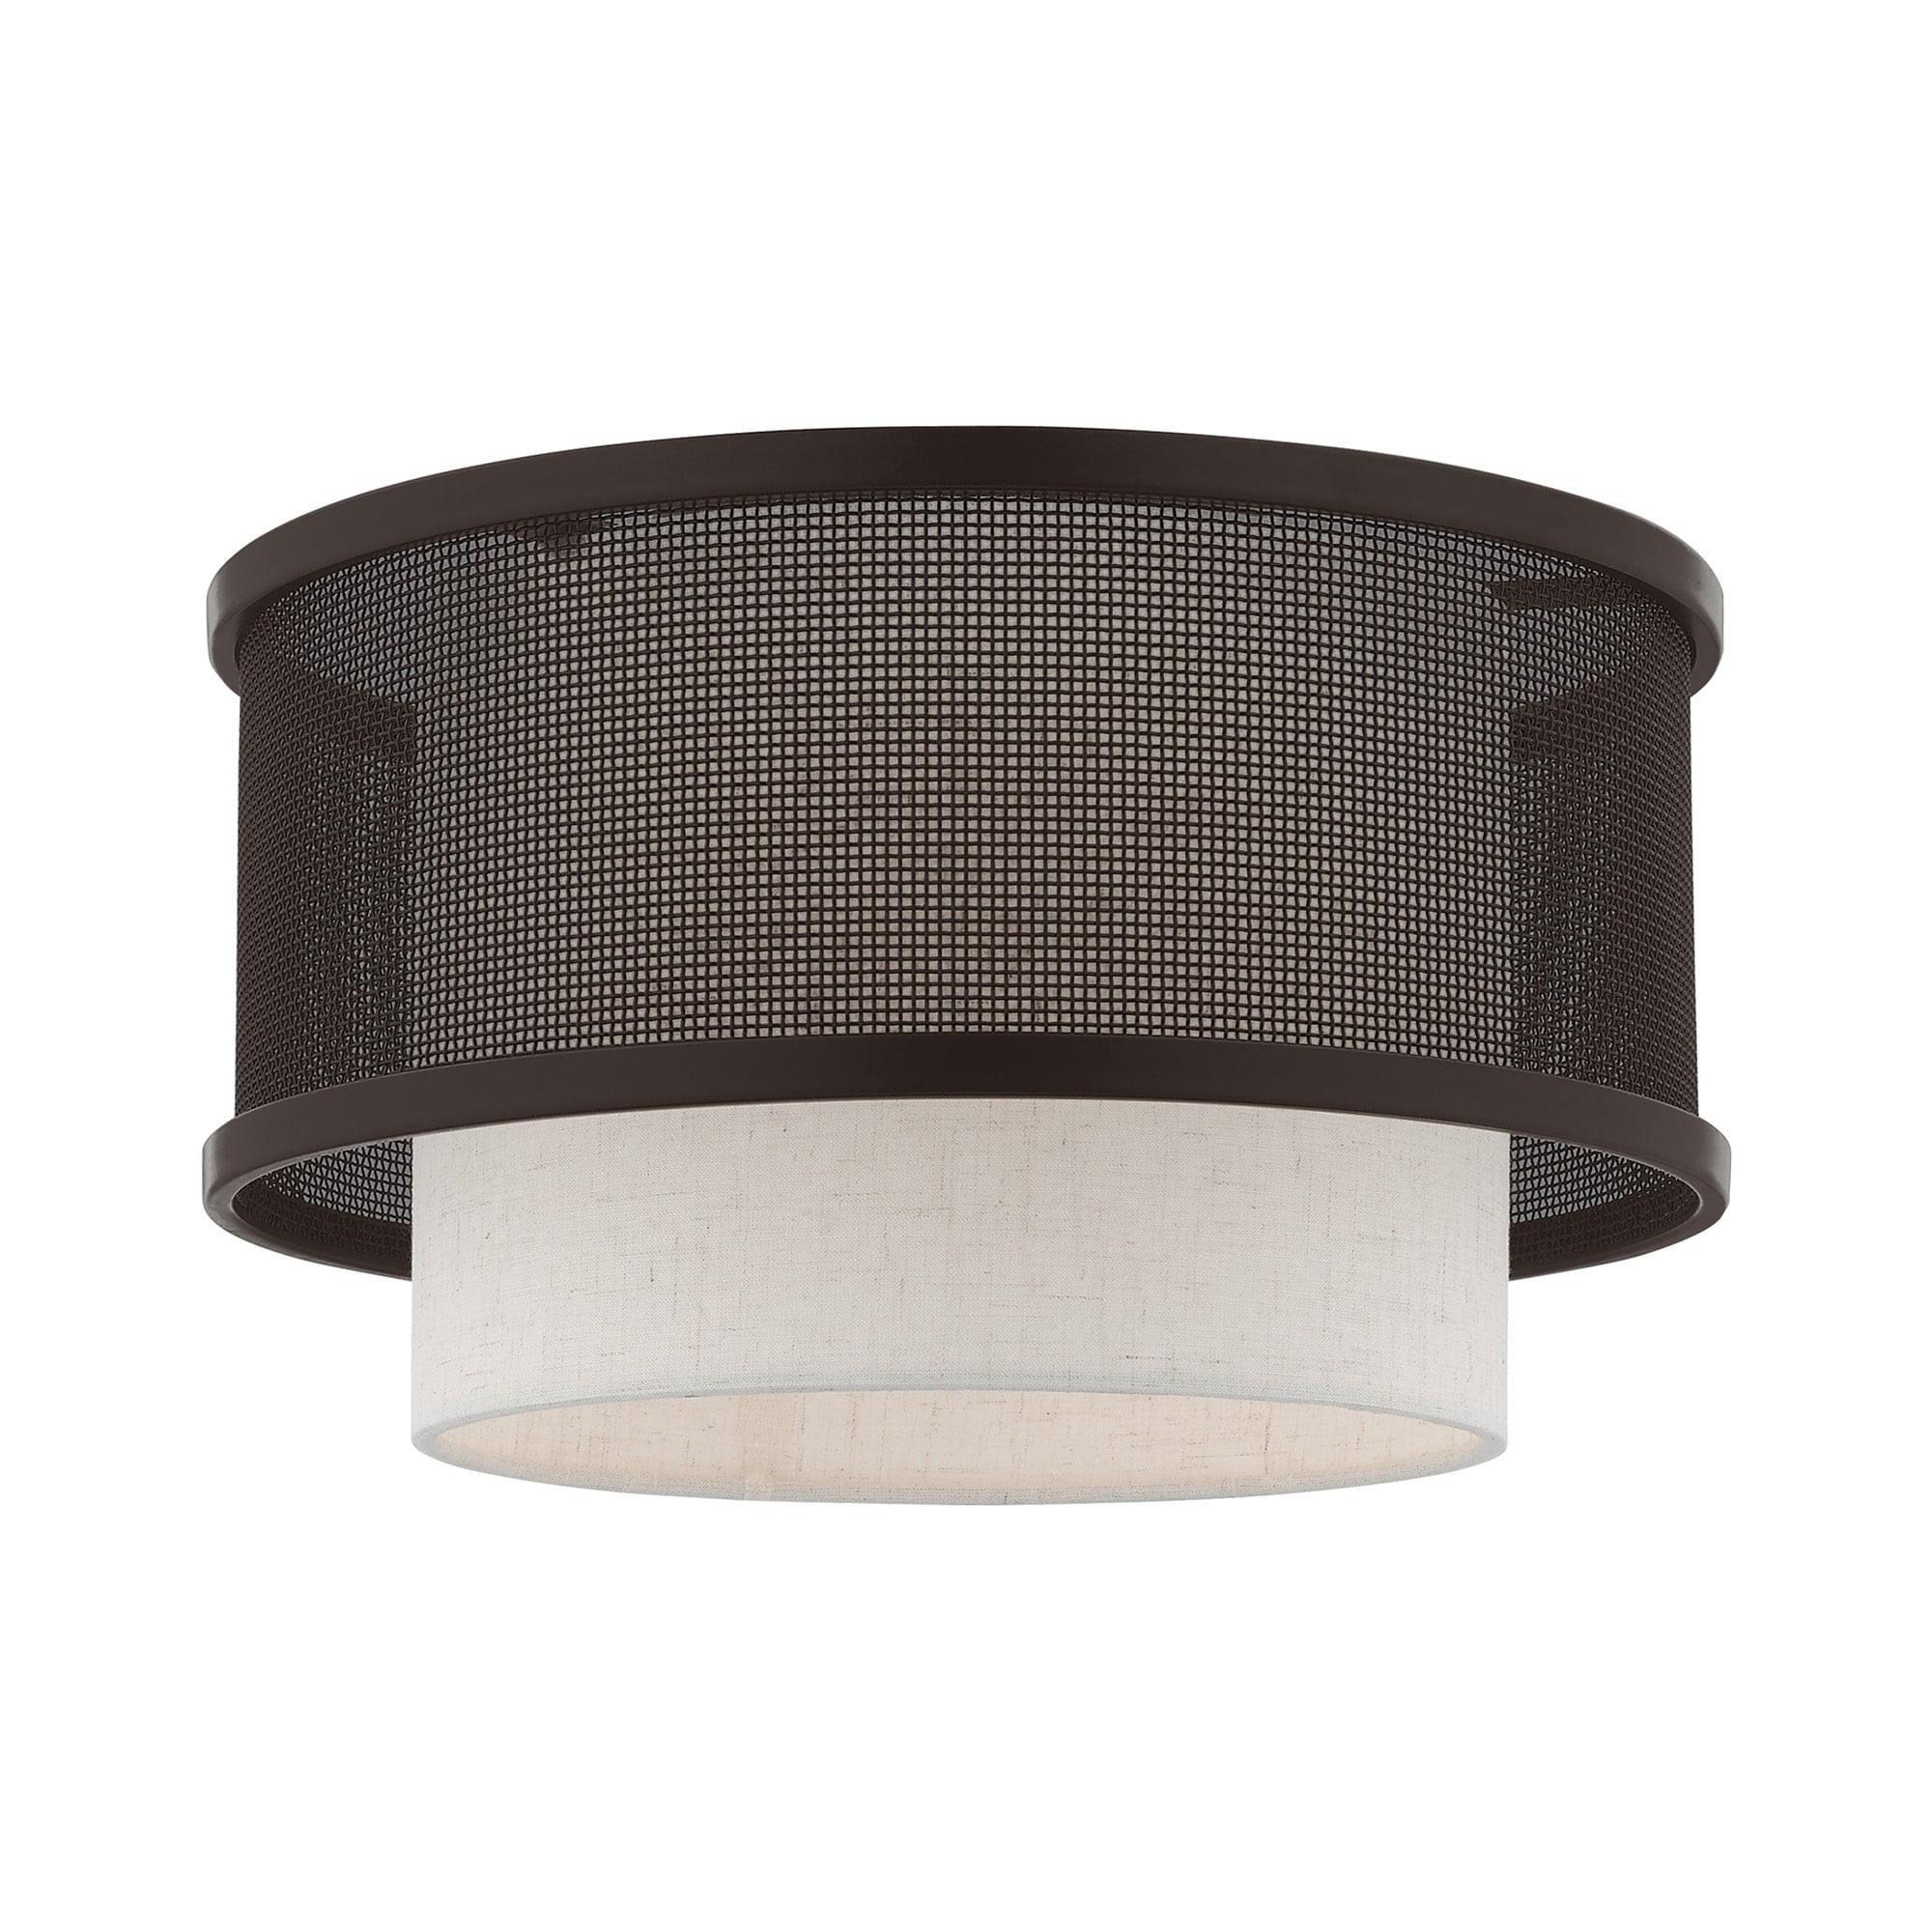 Braddock Urban Bronze Drum Ceiling Mount with Oatmeal Fabric Shade